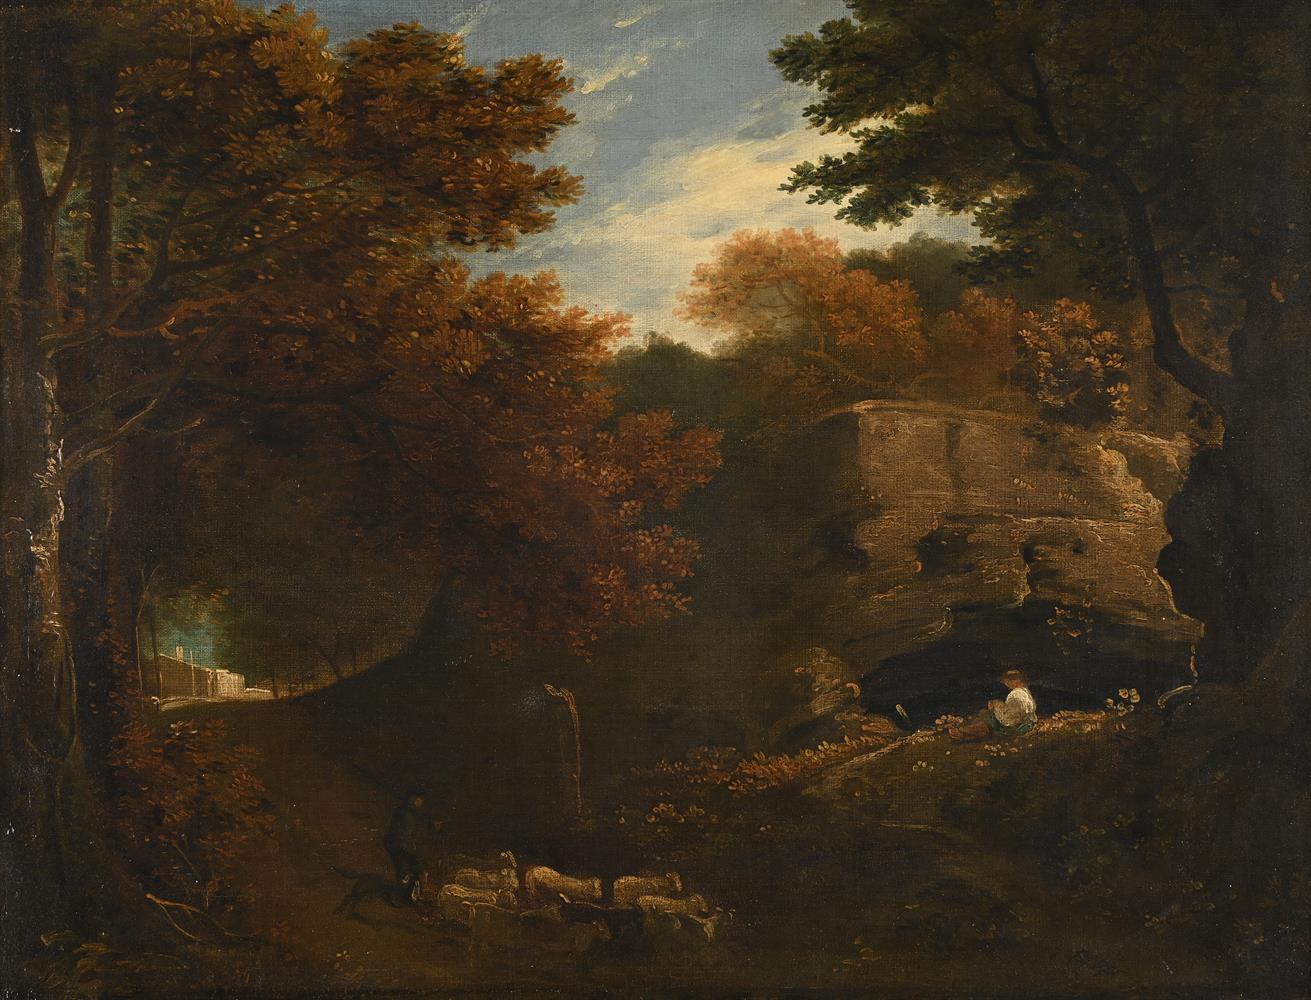 BRITISH SCHOOL (LATE 18TH /EARLY 19TH CENTURY), SEATED FIGURE WITH SHEEP IN A LANDSCAPE - Image 2 of 3